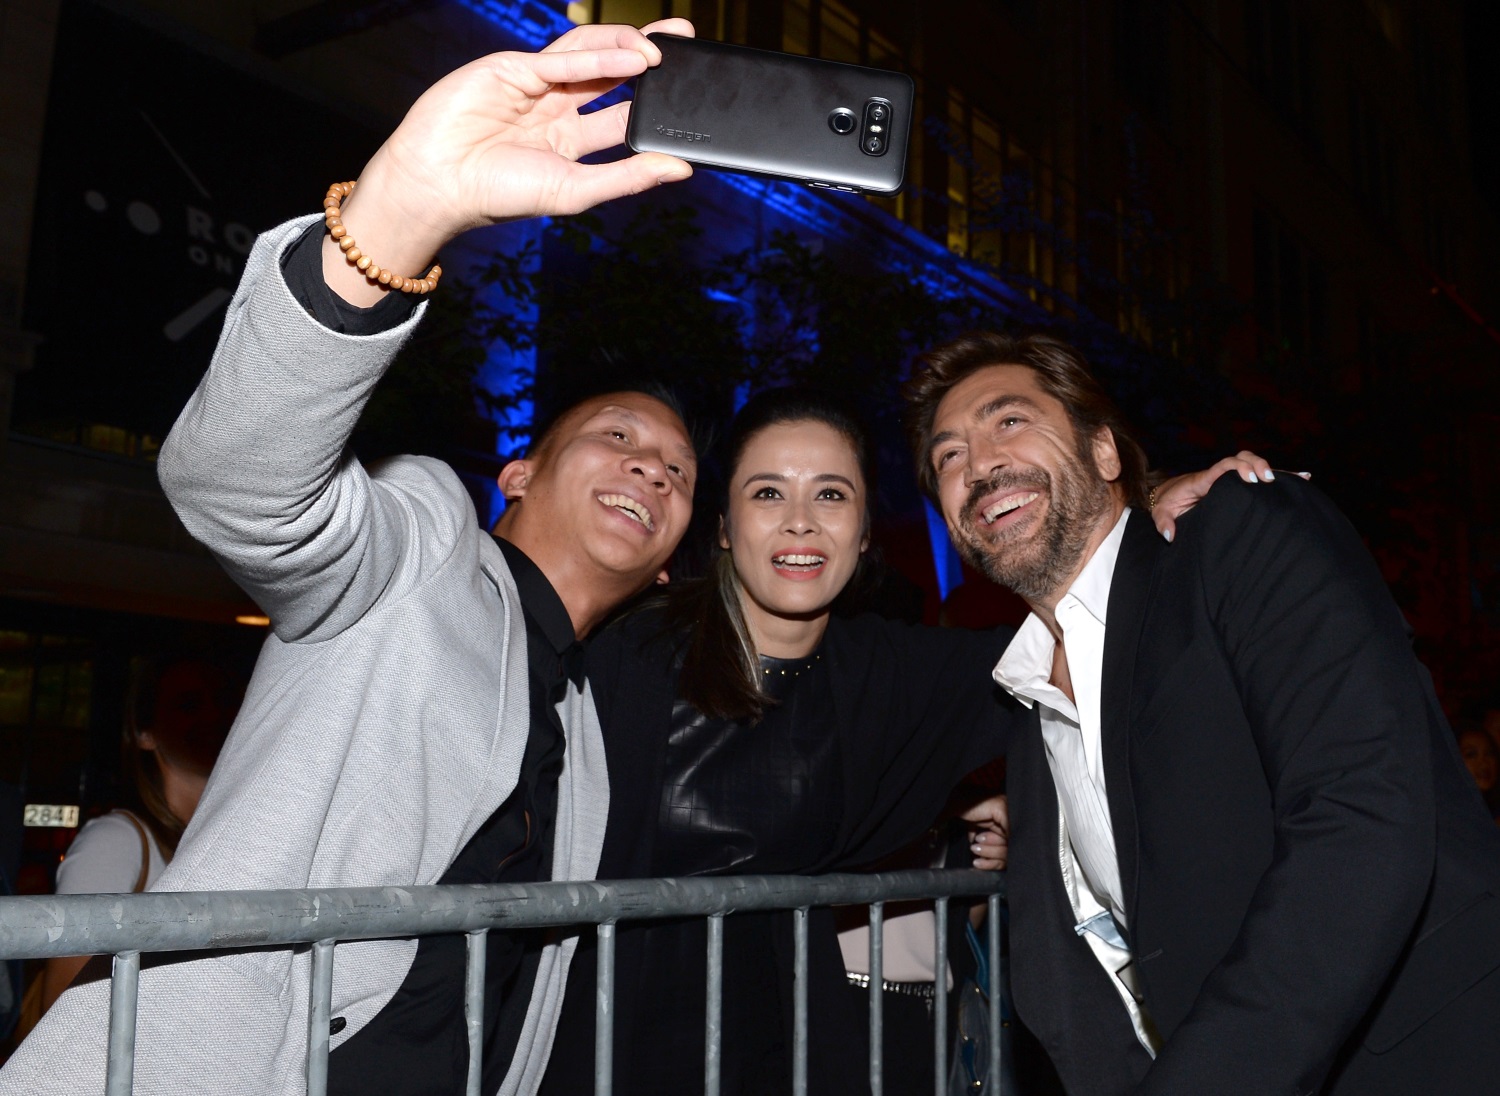 Javier posing for selfie with fans